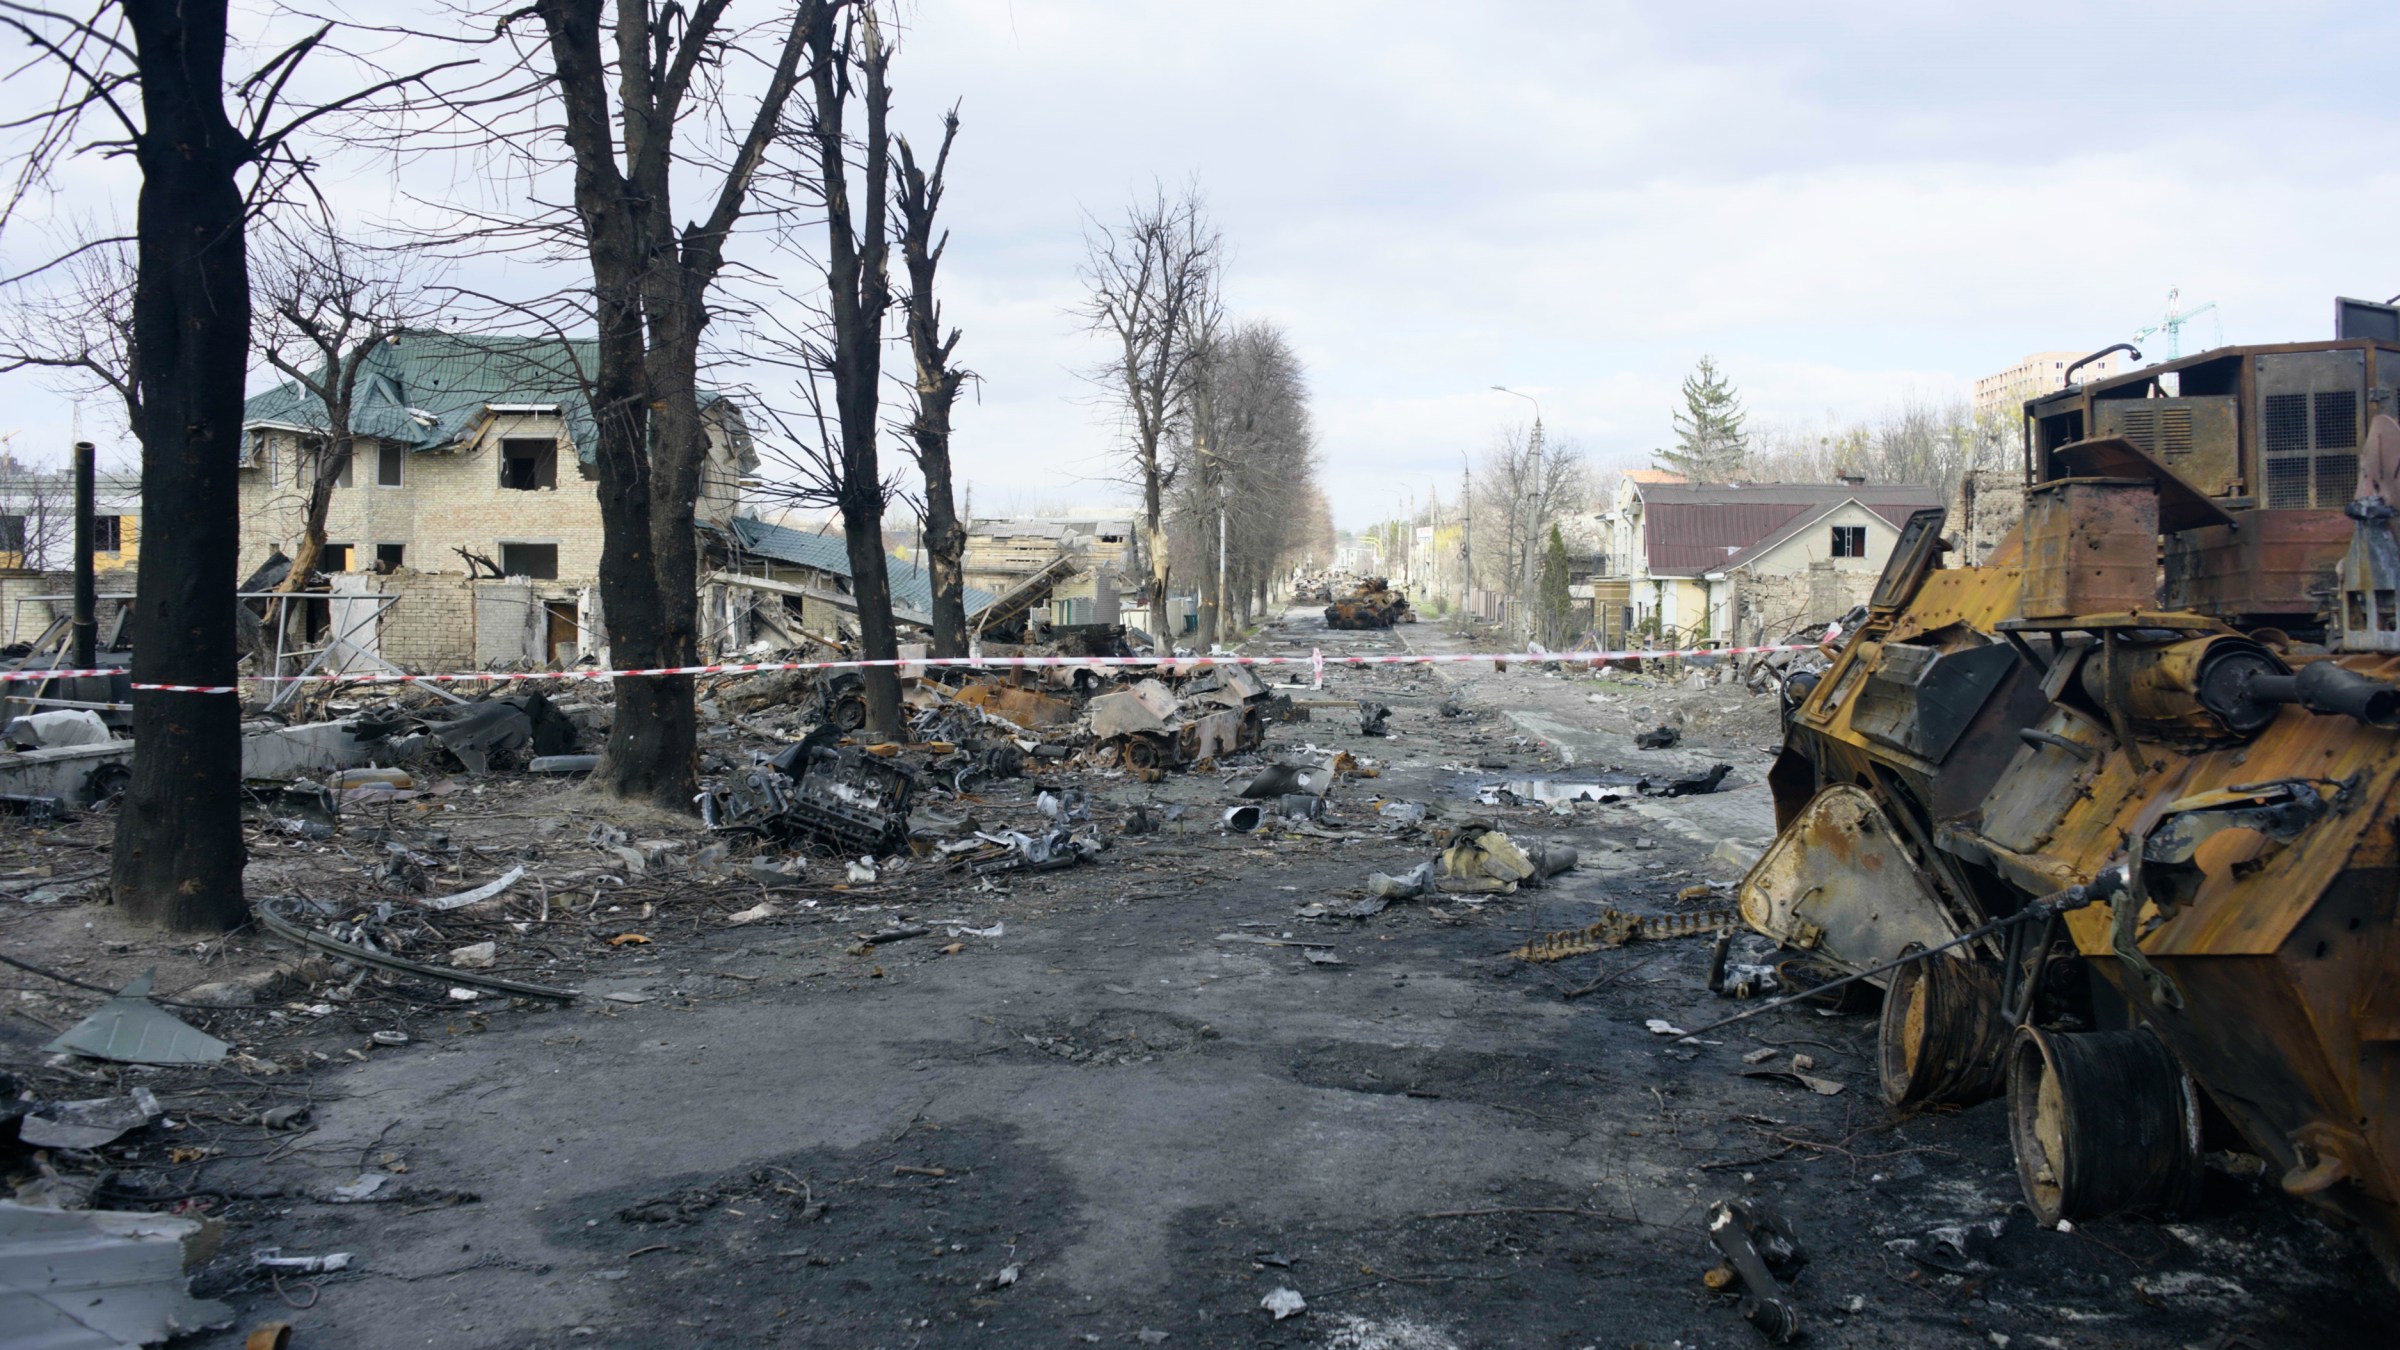 A street filled with ruble and destroyed military equipment.